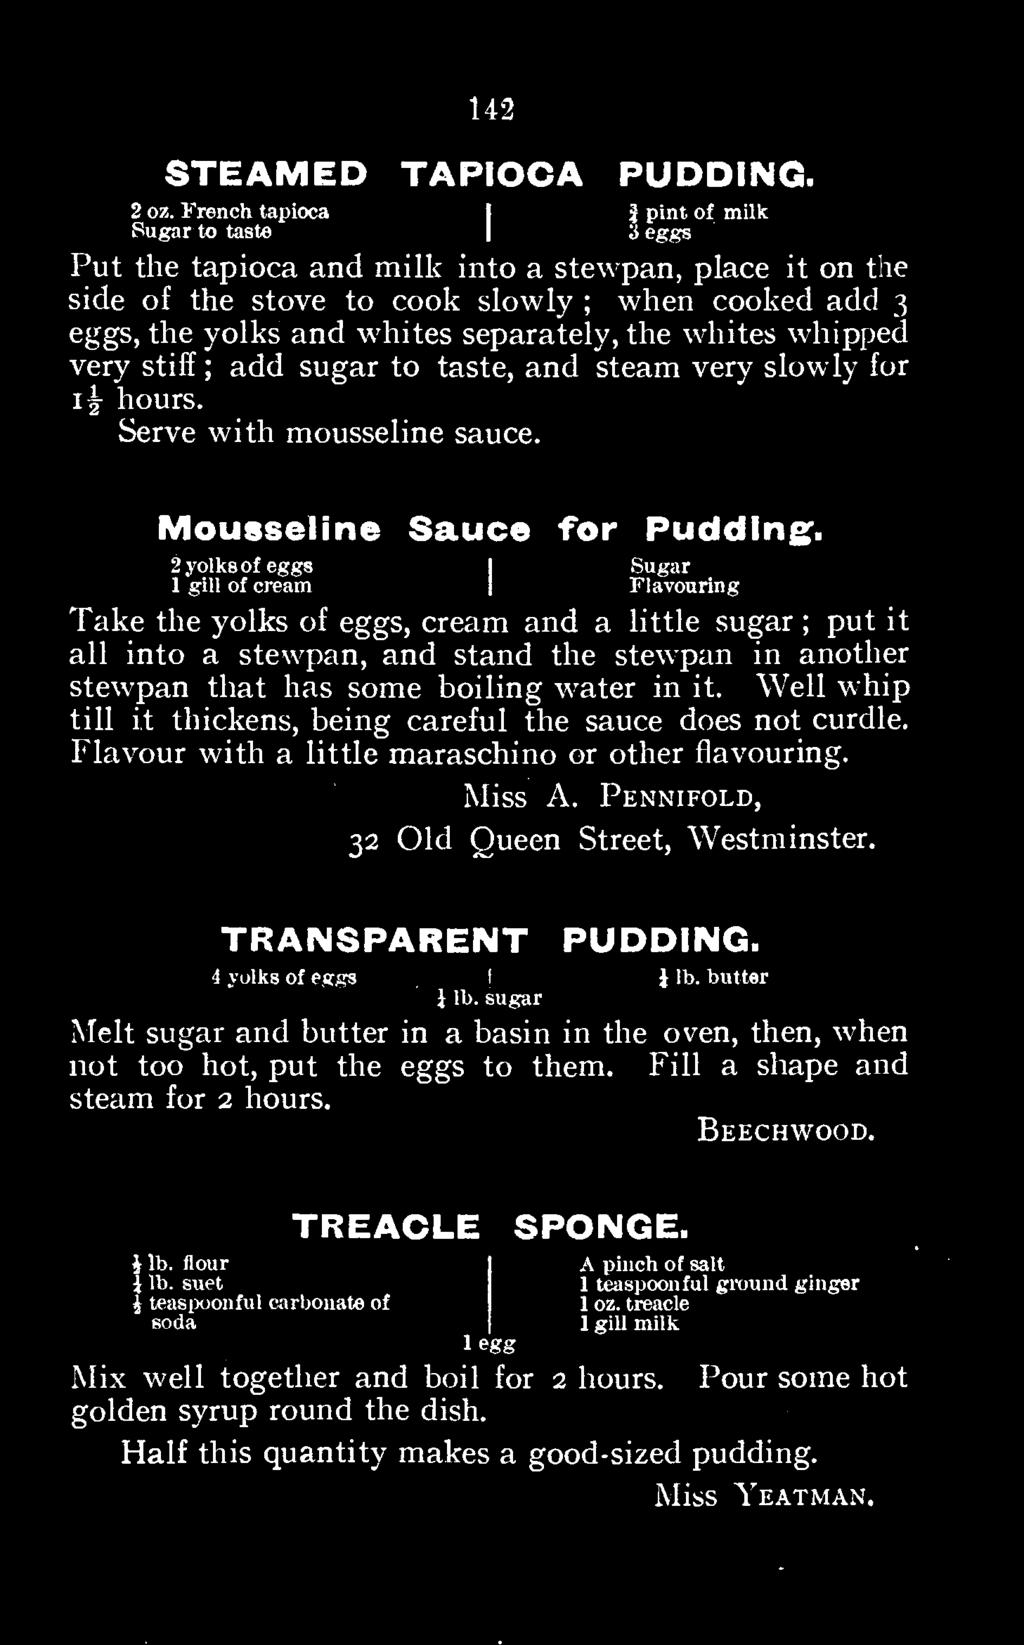 Well whip till it thickens, being careful the sauce does not curdle. Flavour with a little maraschino or other flavouring. Miss A. Pennifold, 32 Old Queen Street, Westminster. TRANSPARENT PUDDING.